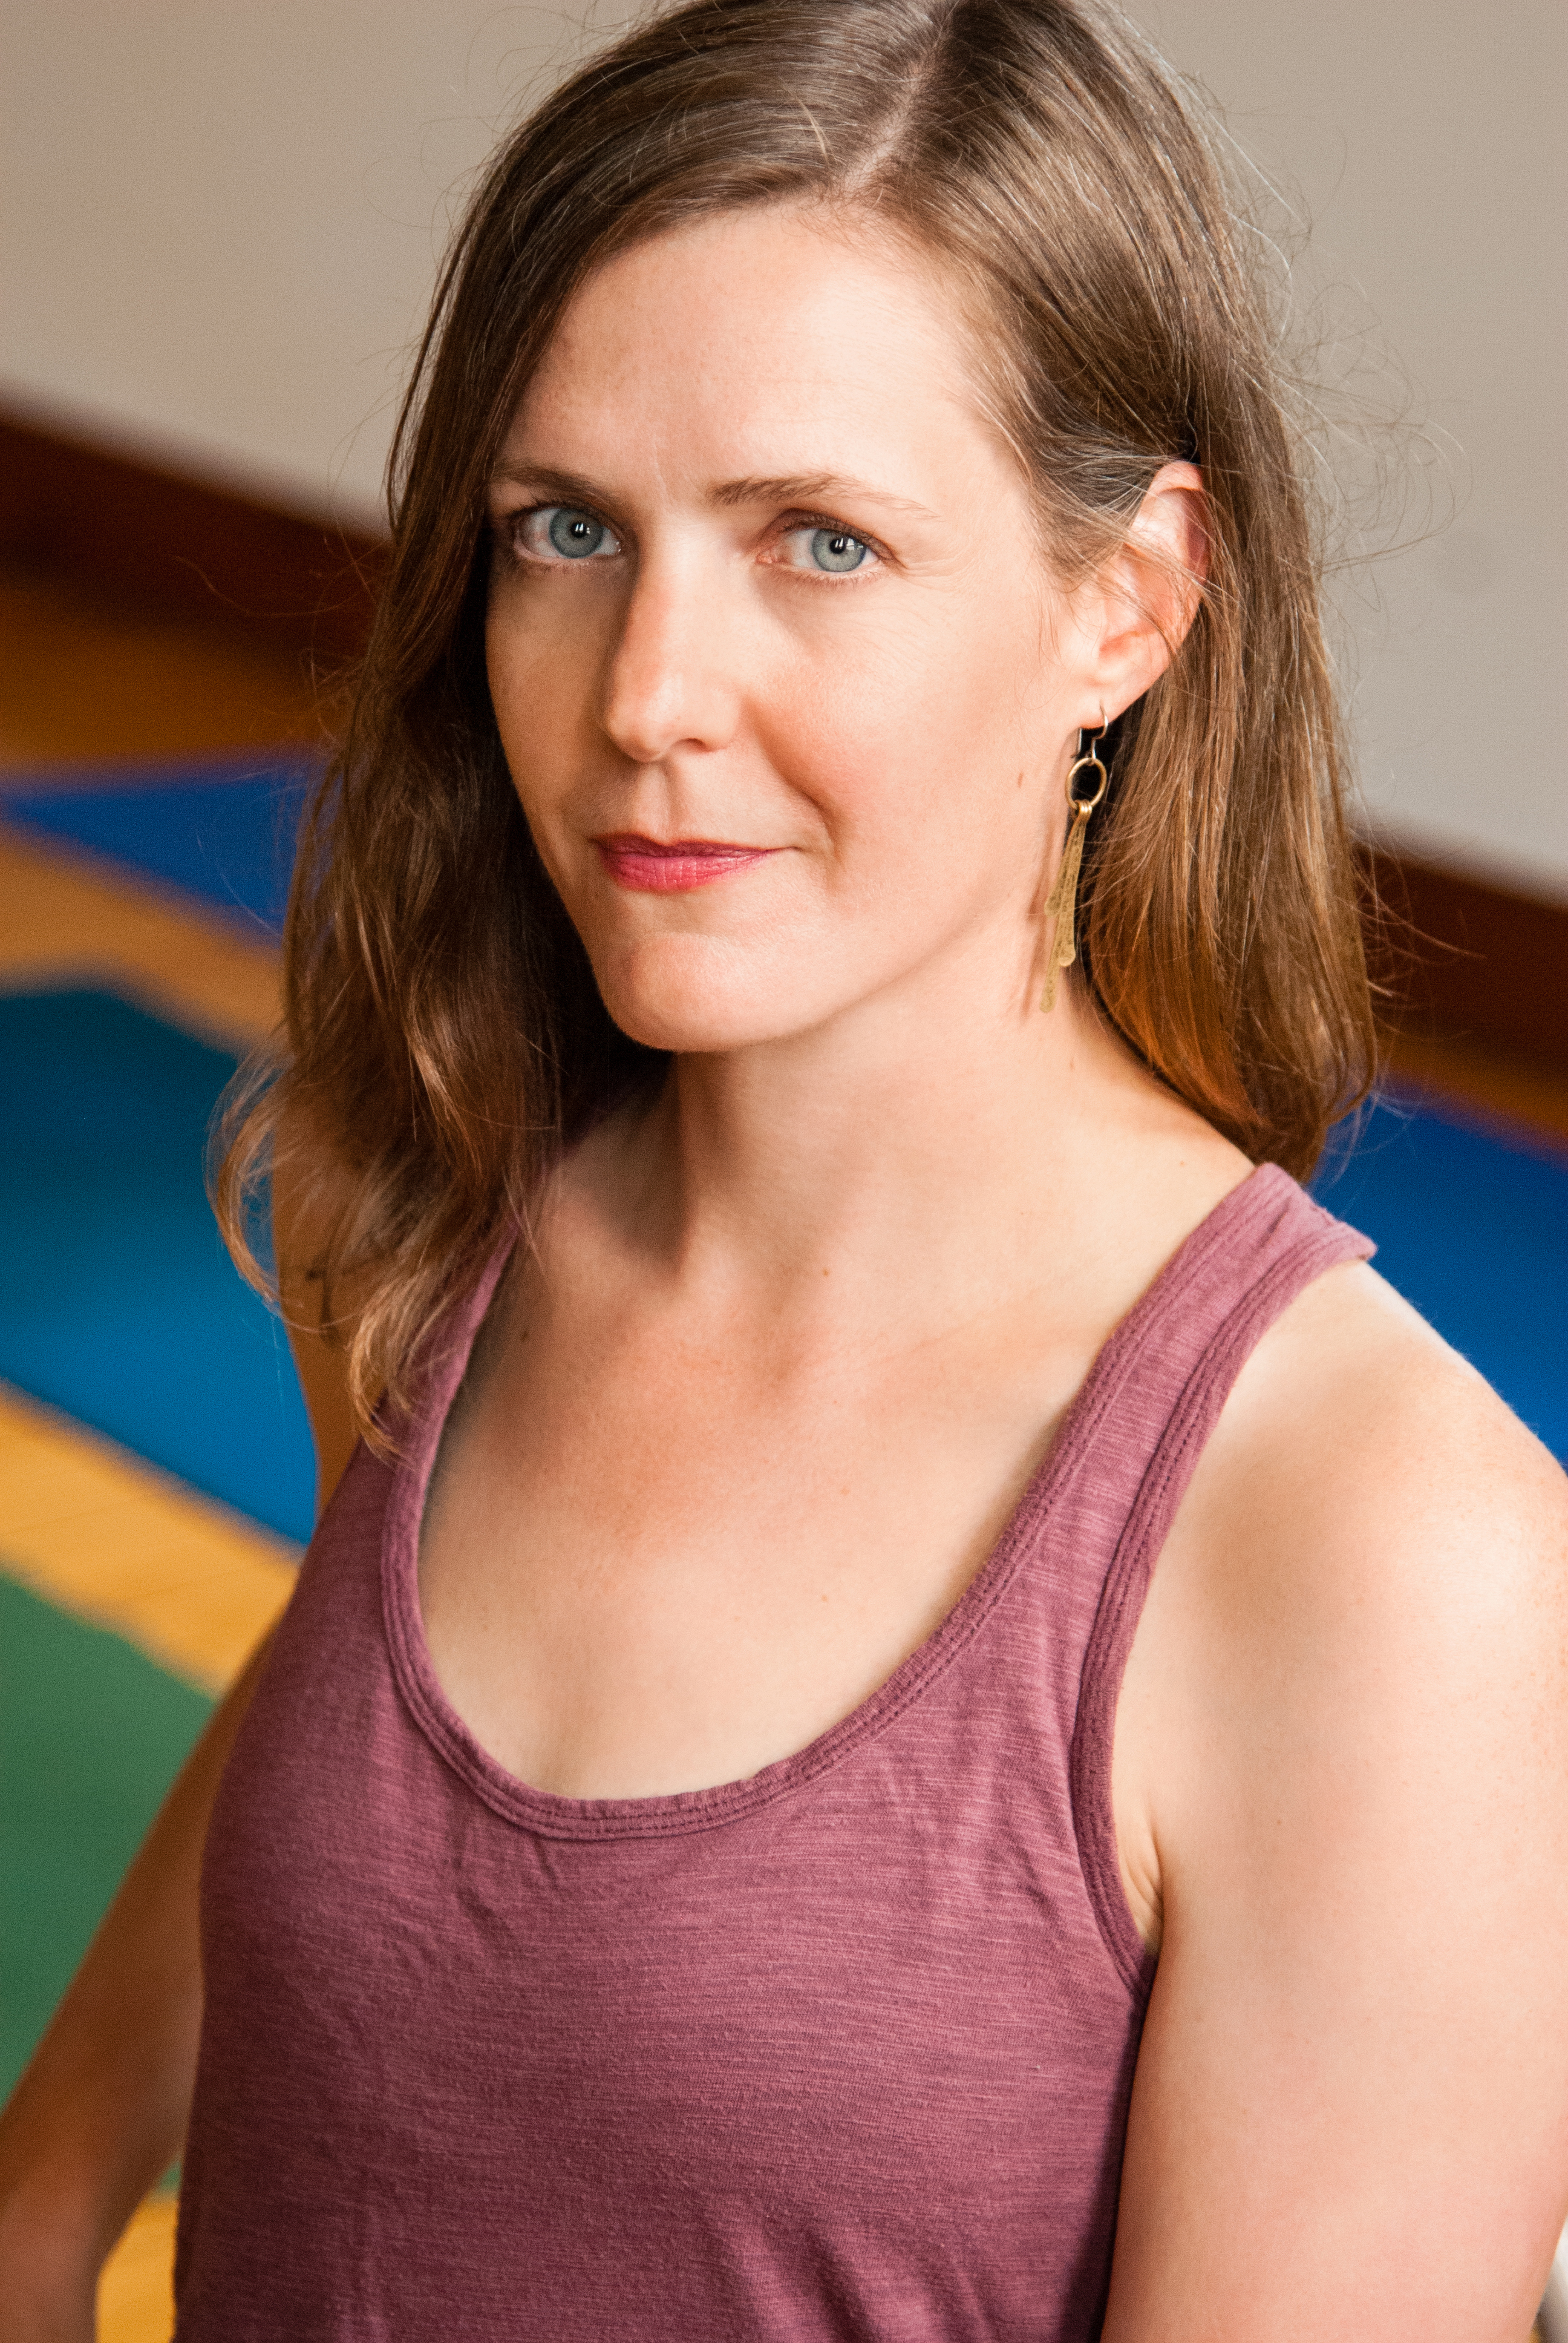 A picture of Erin Ehlers, a white woman in a pink tank top with blue yoga mats behind her.